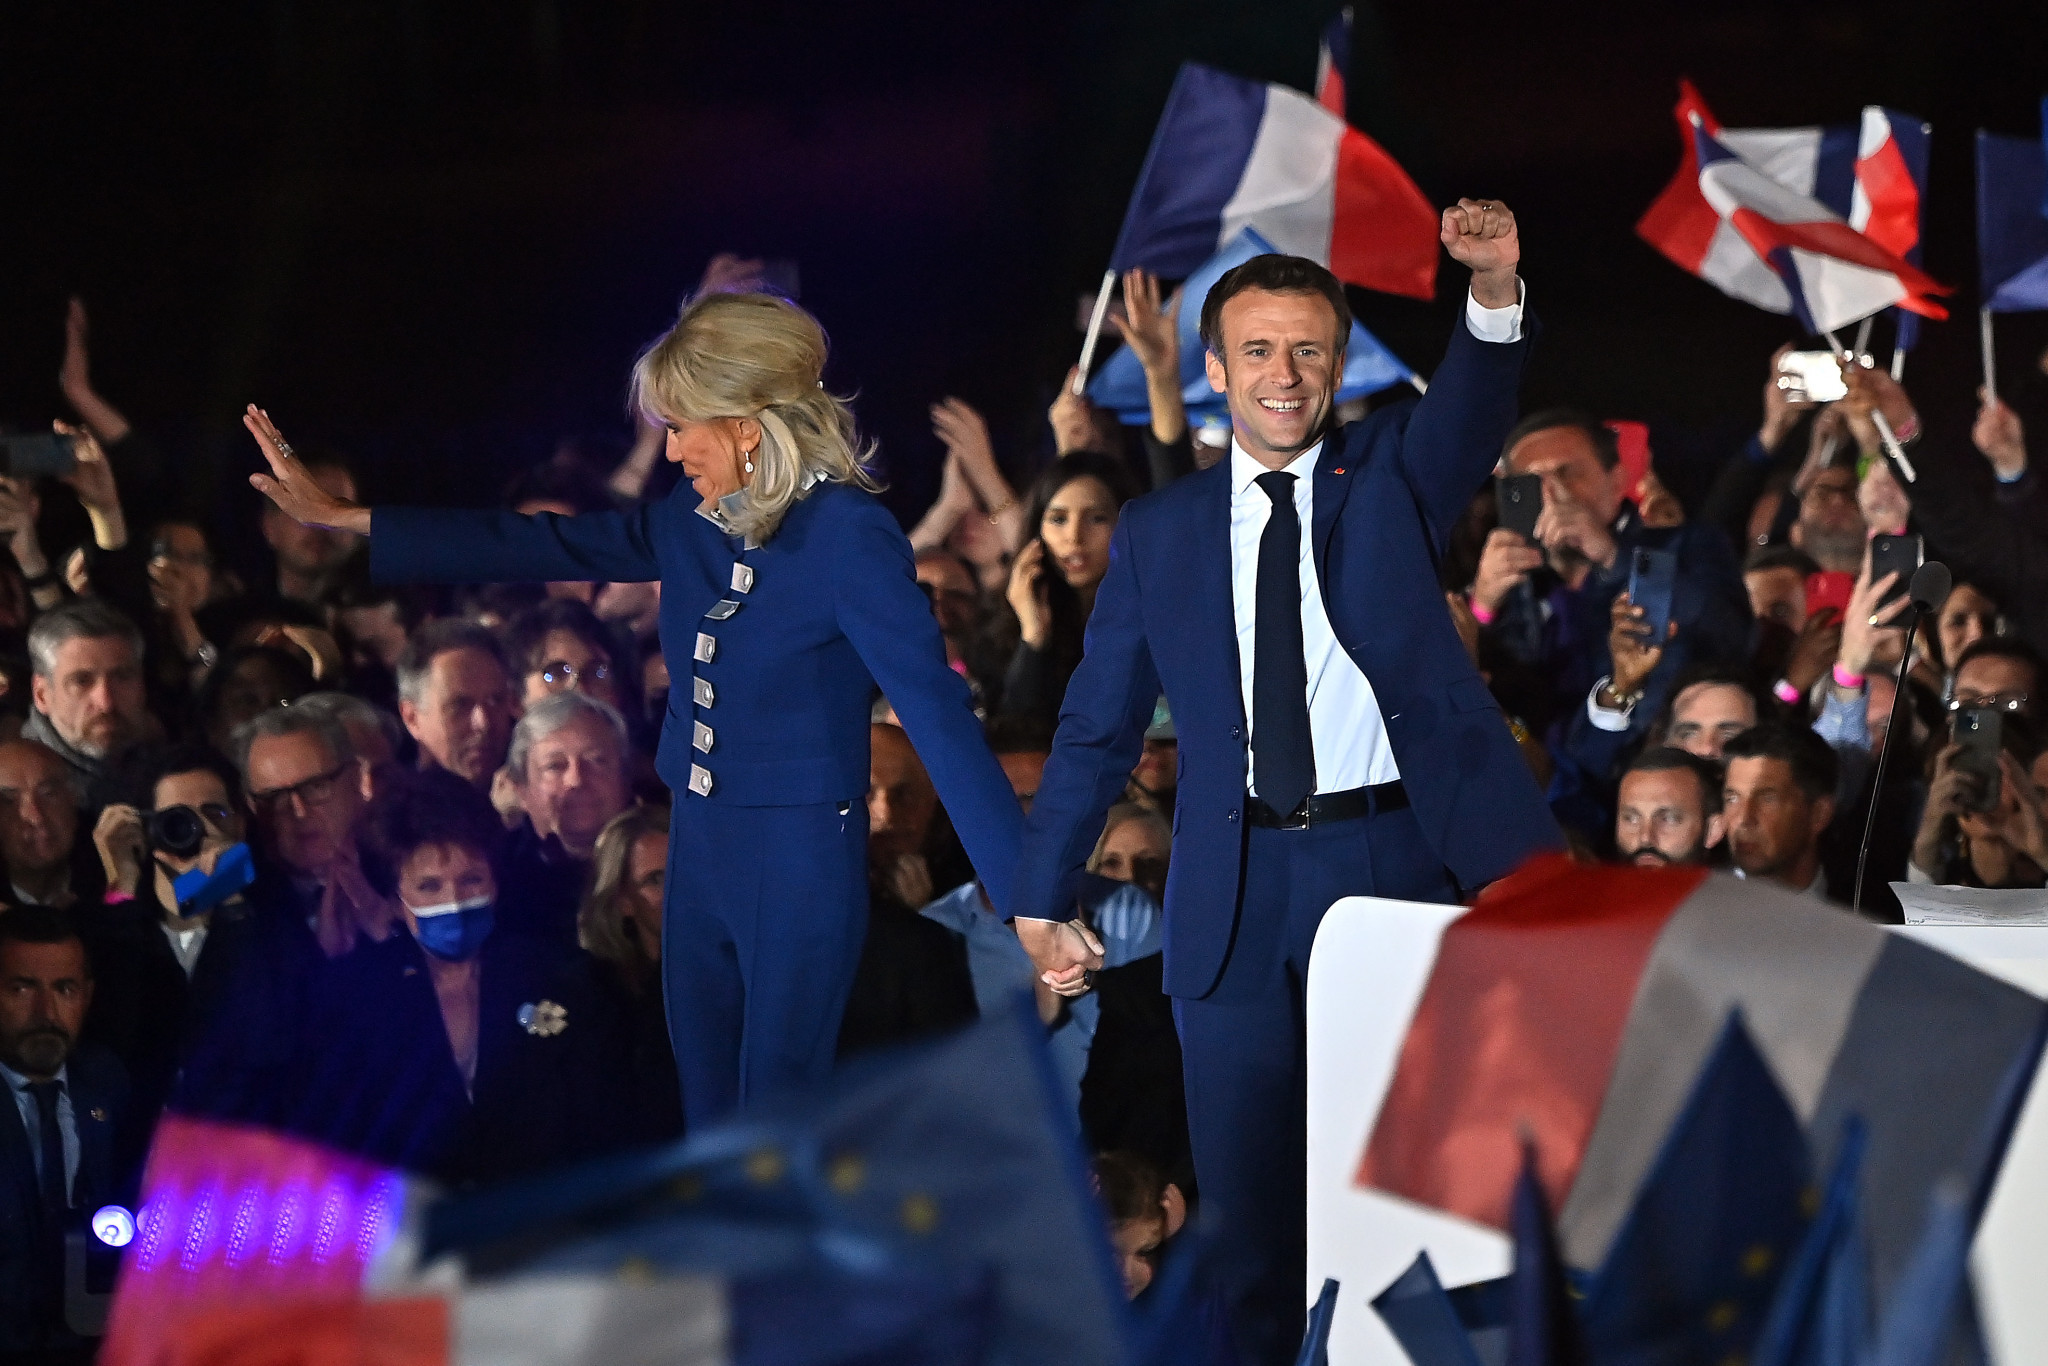 Macron beats Le Pen for second term as President of France due to include Paris 2024 Olympics